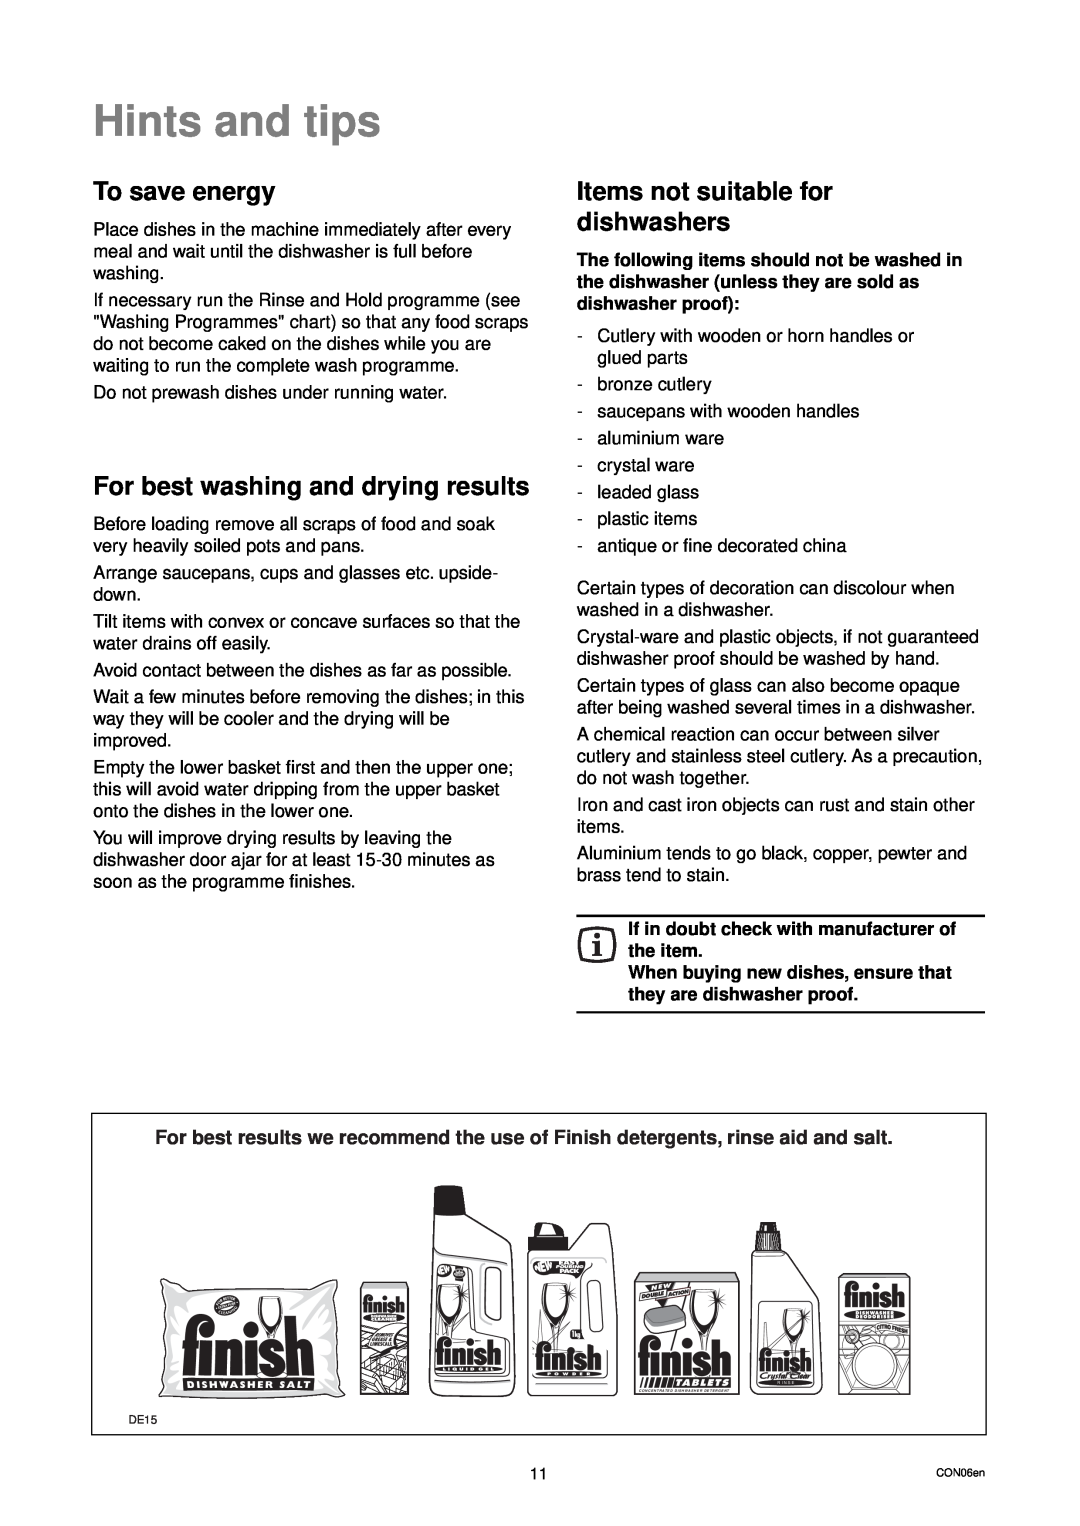 Zanussi DWS 935 Hints and tips, To save energy, For best washing and drying results, Items not suitable for dishwashers 